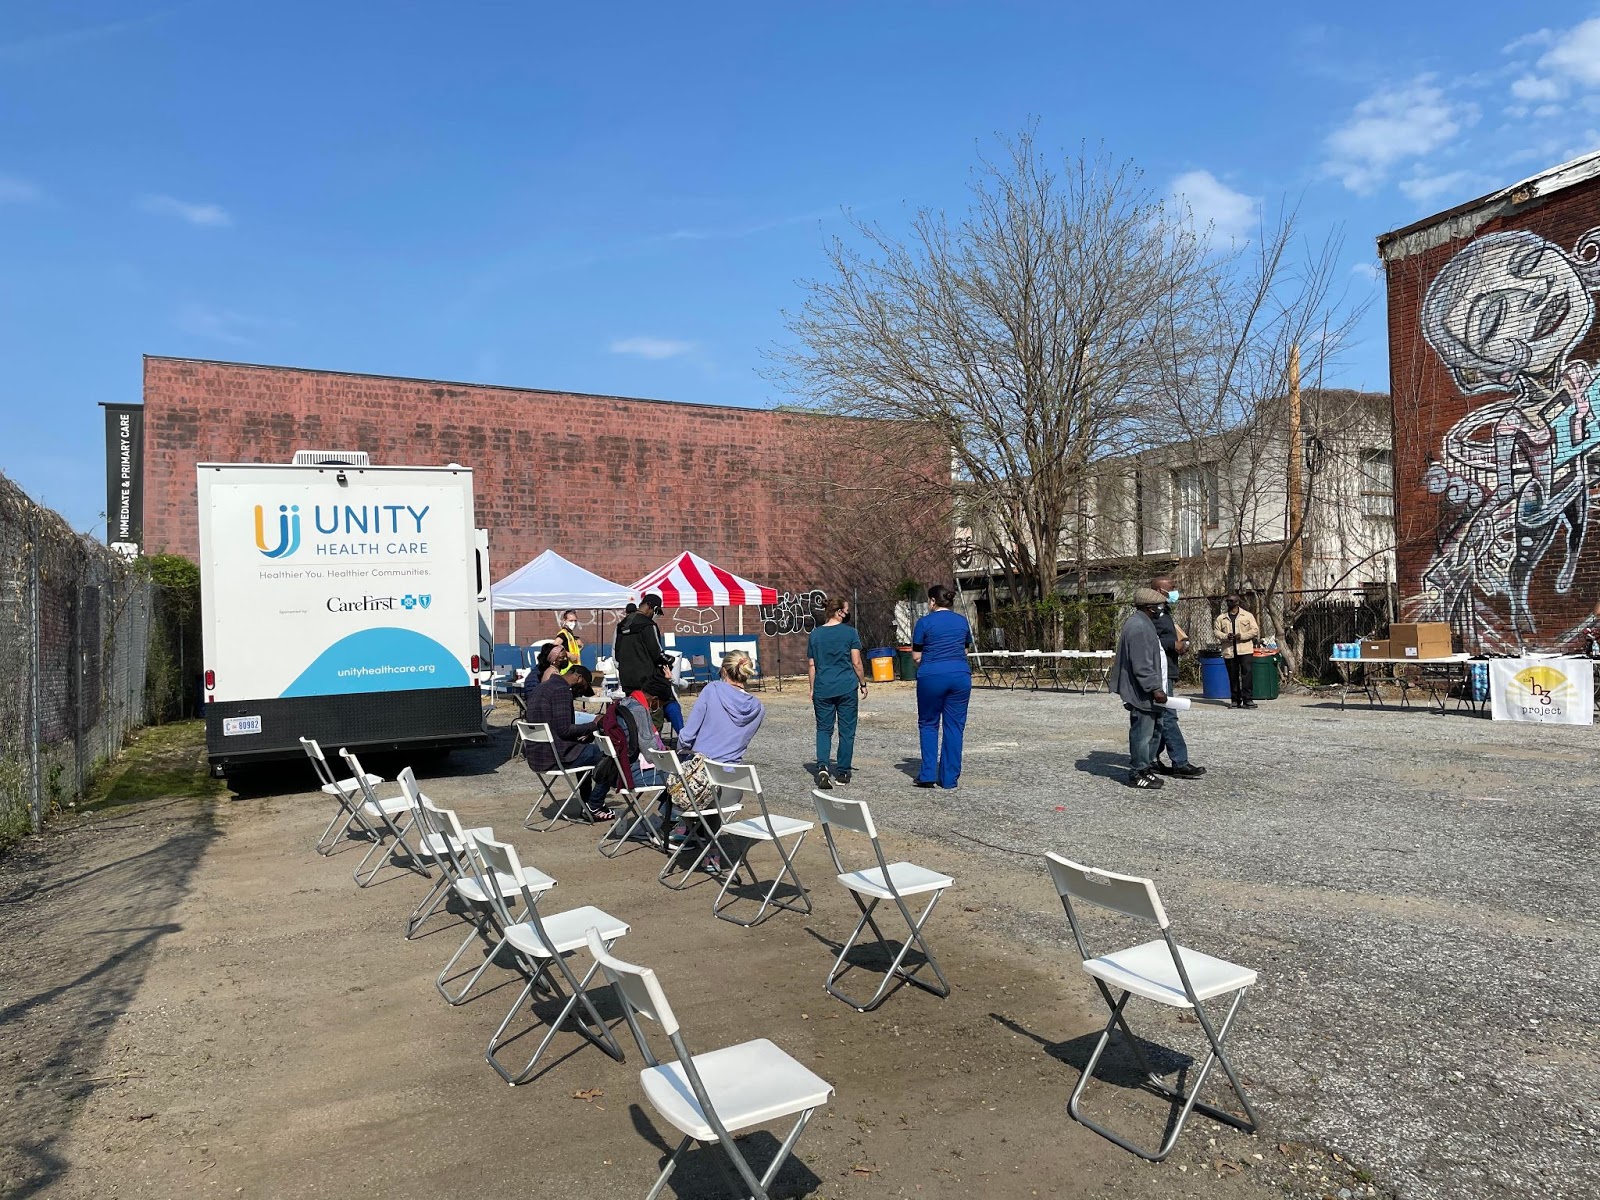 Image shows chairs, Unity Health Care truck and scattered people in a parking lot in NOMA